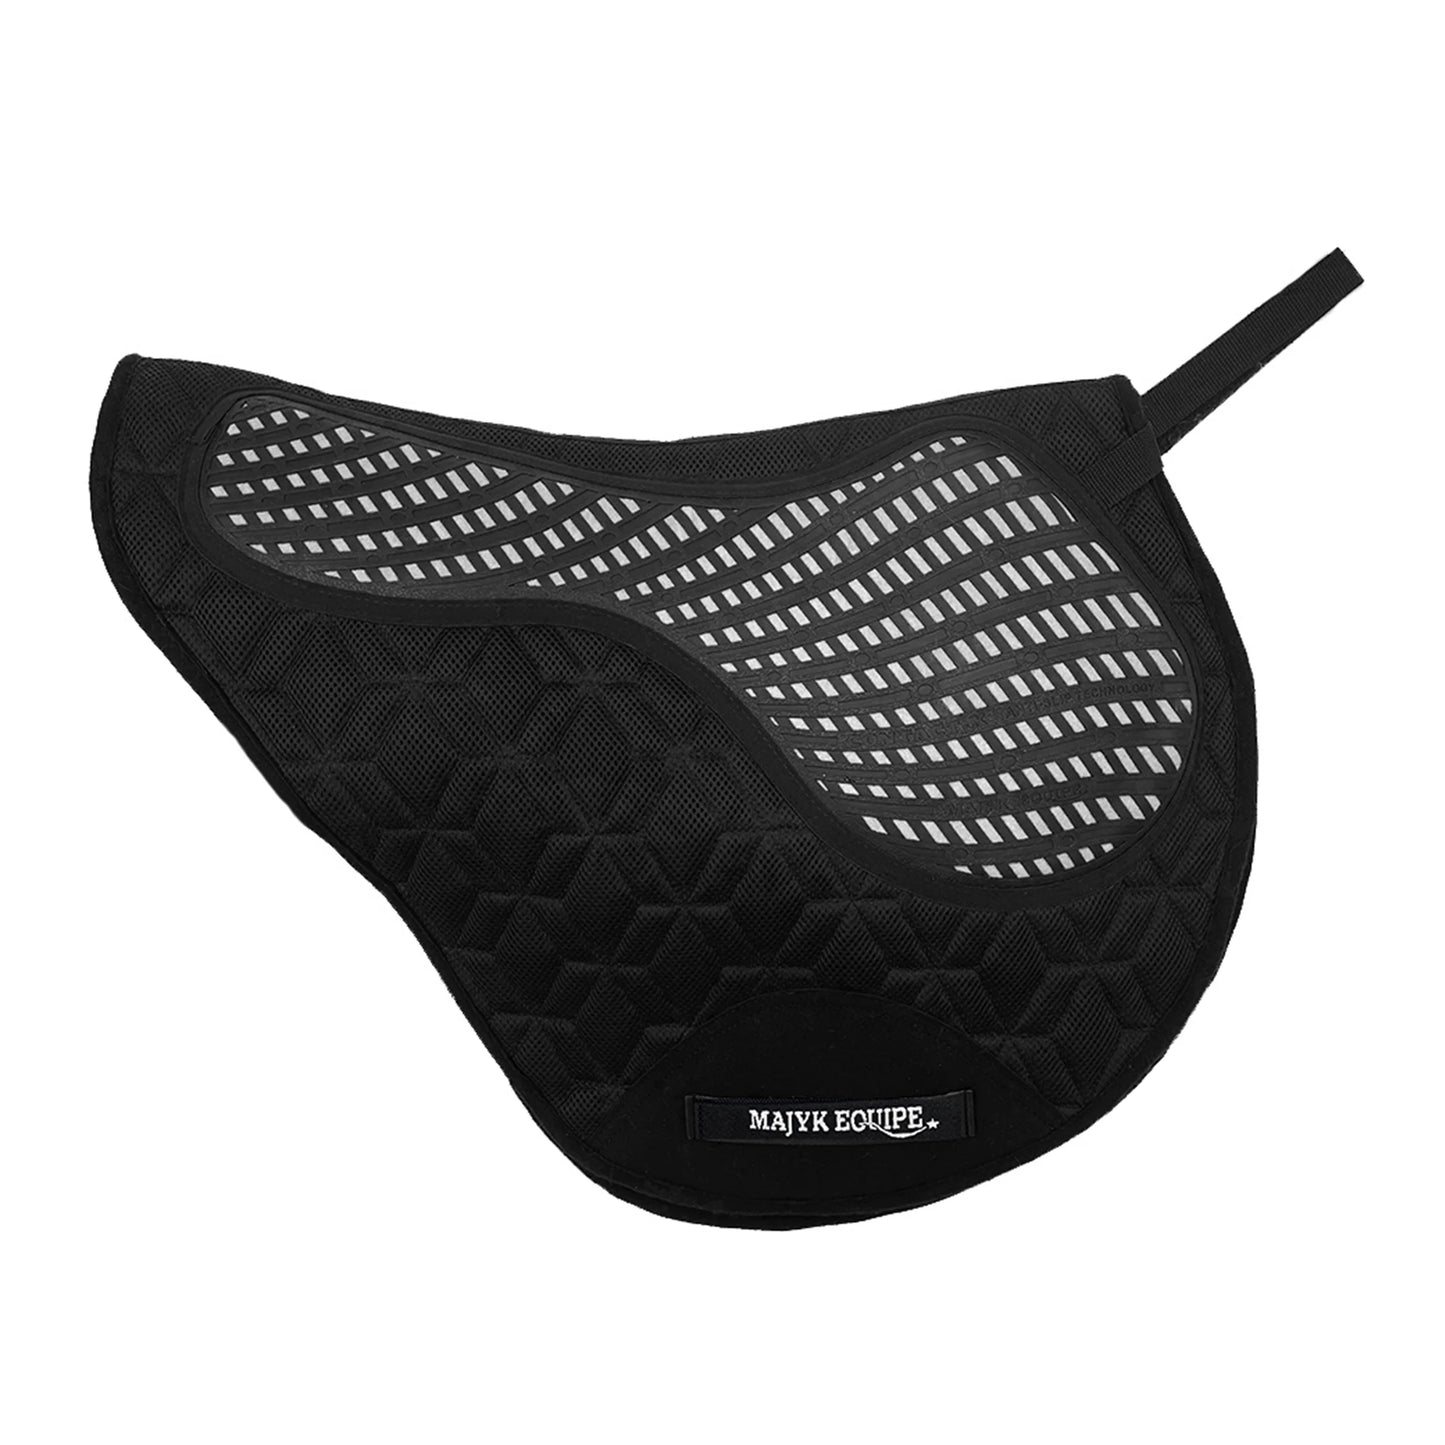 MAJYK EQUIPE Xc Pad Non-Slip Cool Mesh with Impaction Protection